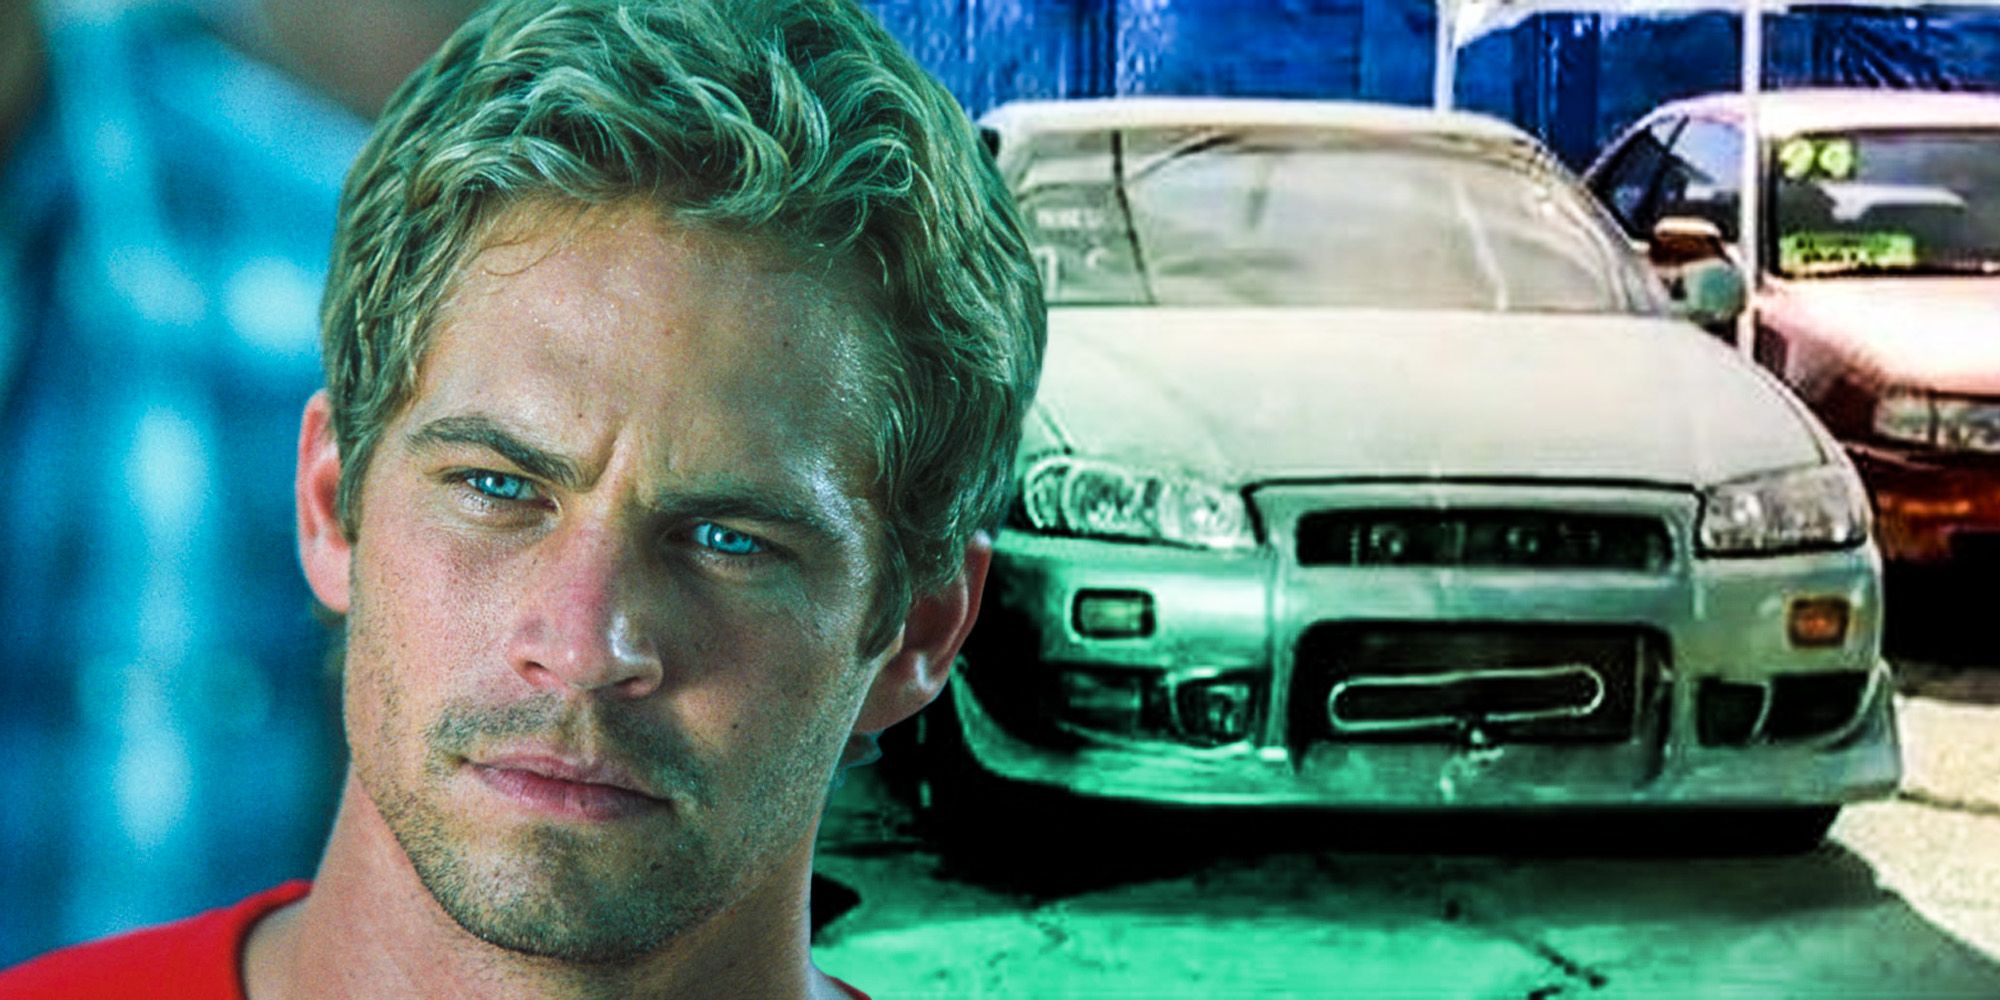 What Happened To Brian In The Forgotten 2 Fast 2 Furious Prequel Short